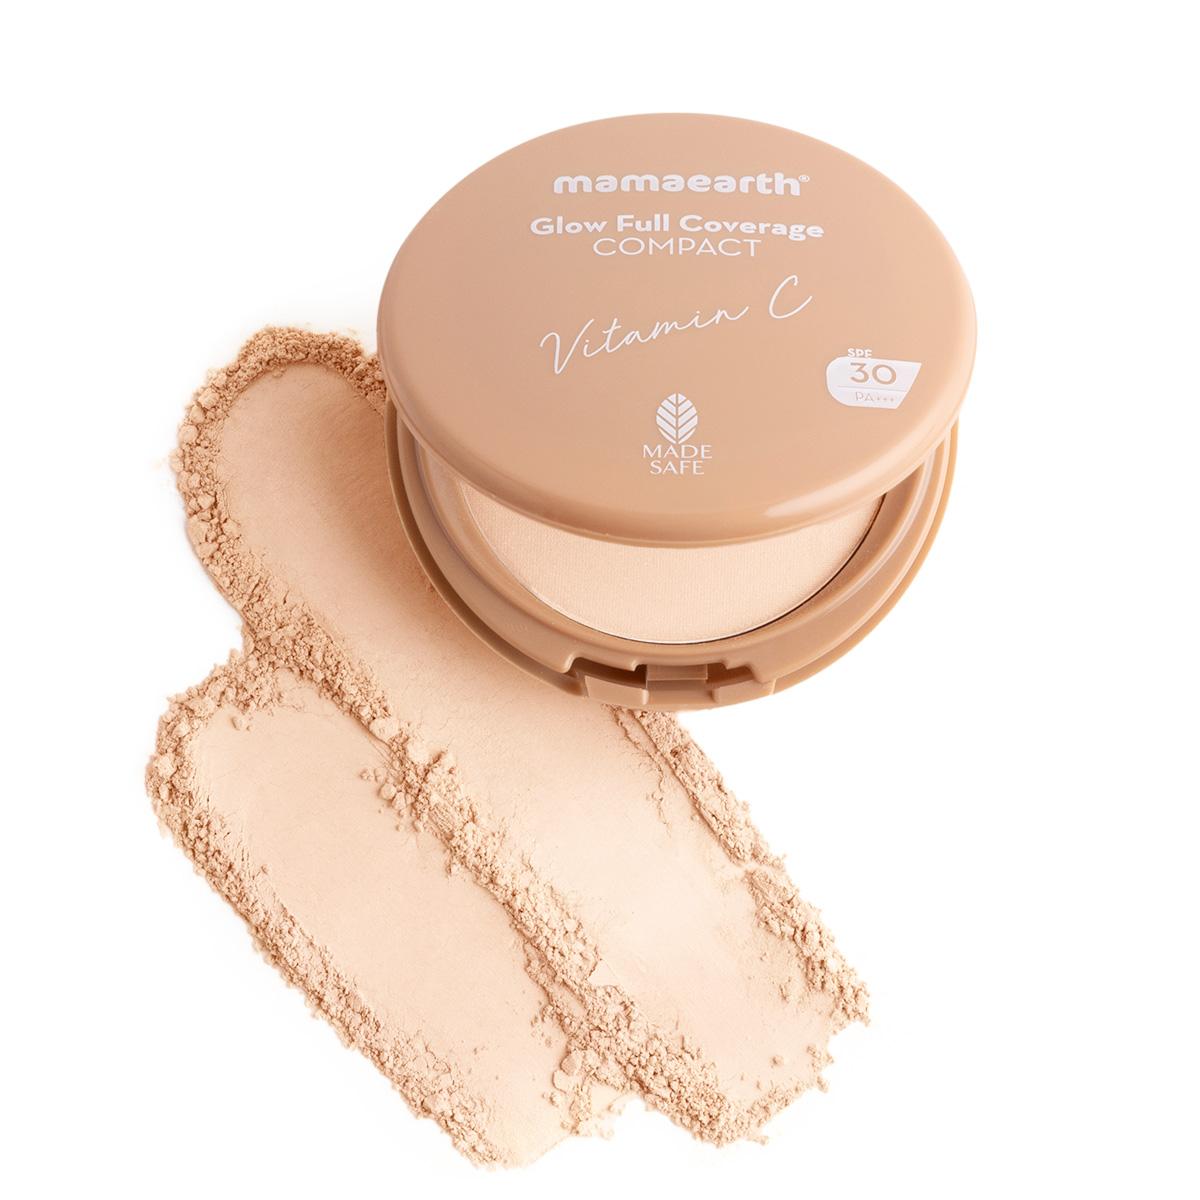 glow full coverage compact with spf 30 - 9g | pearl glow